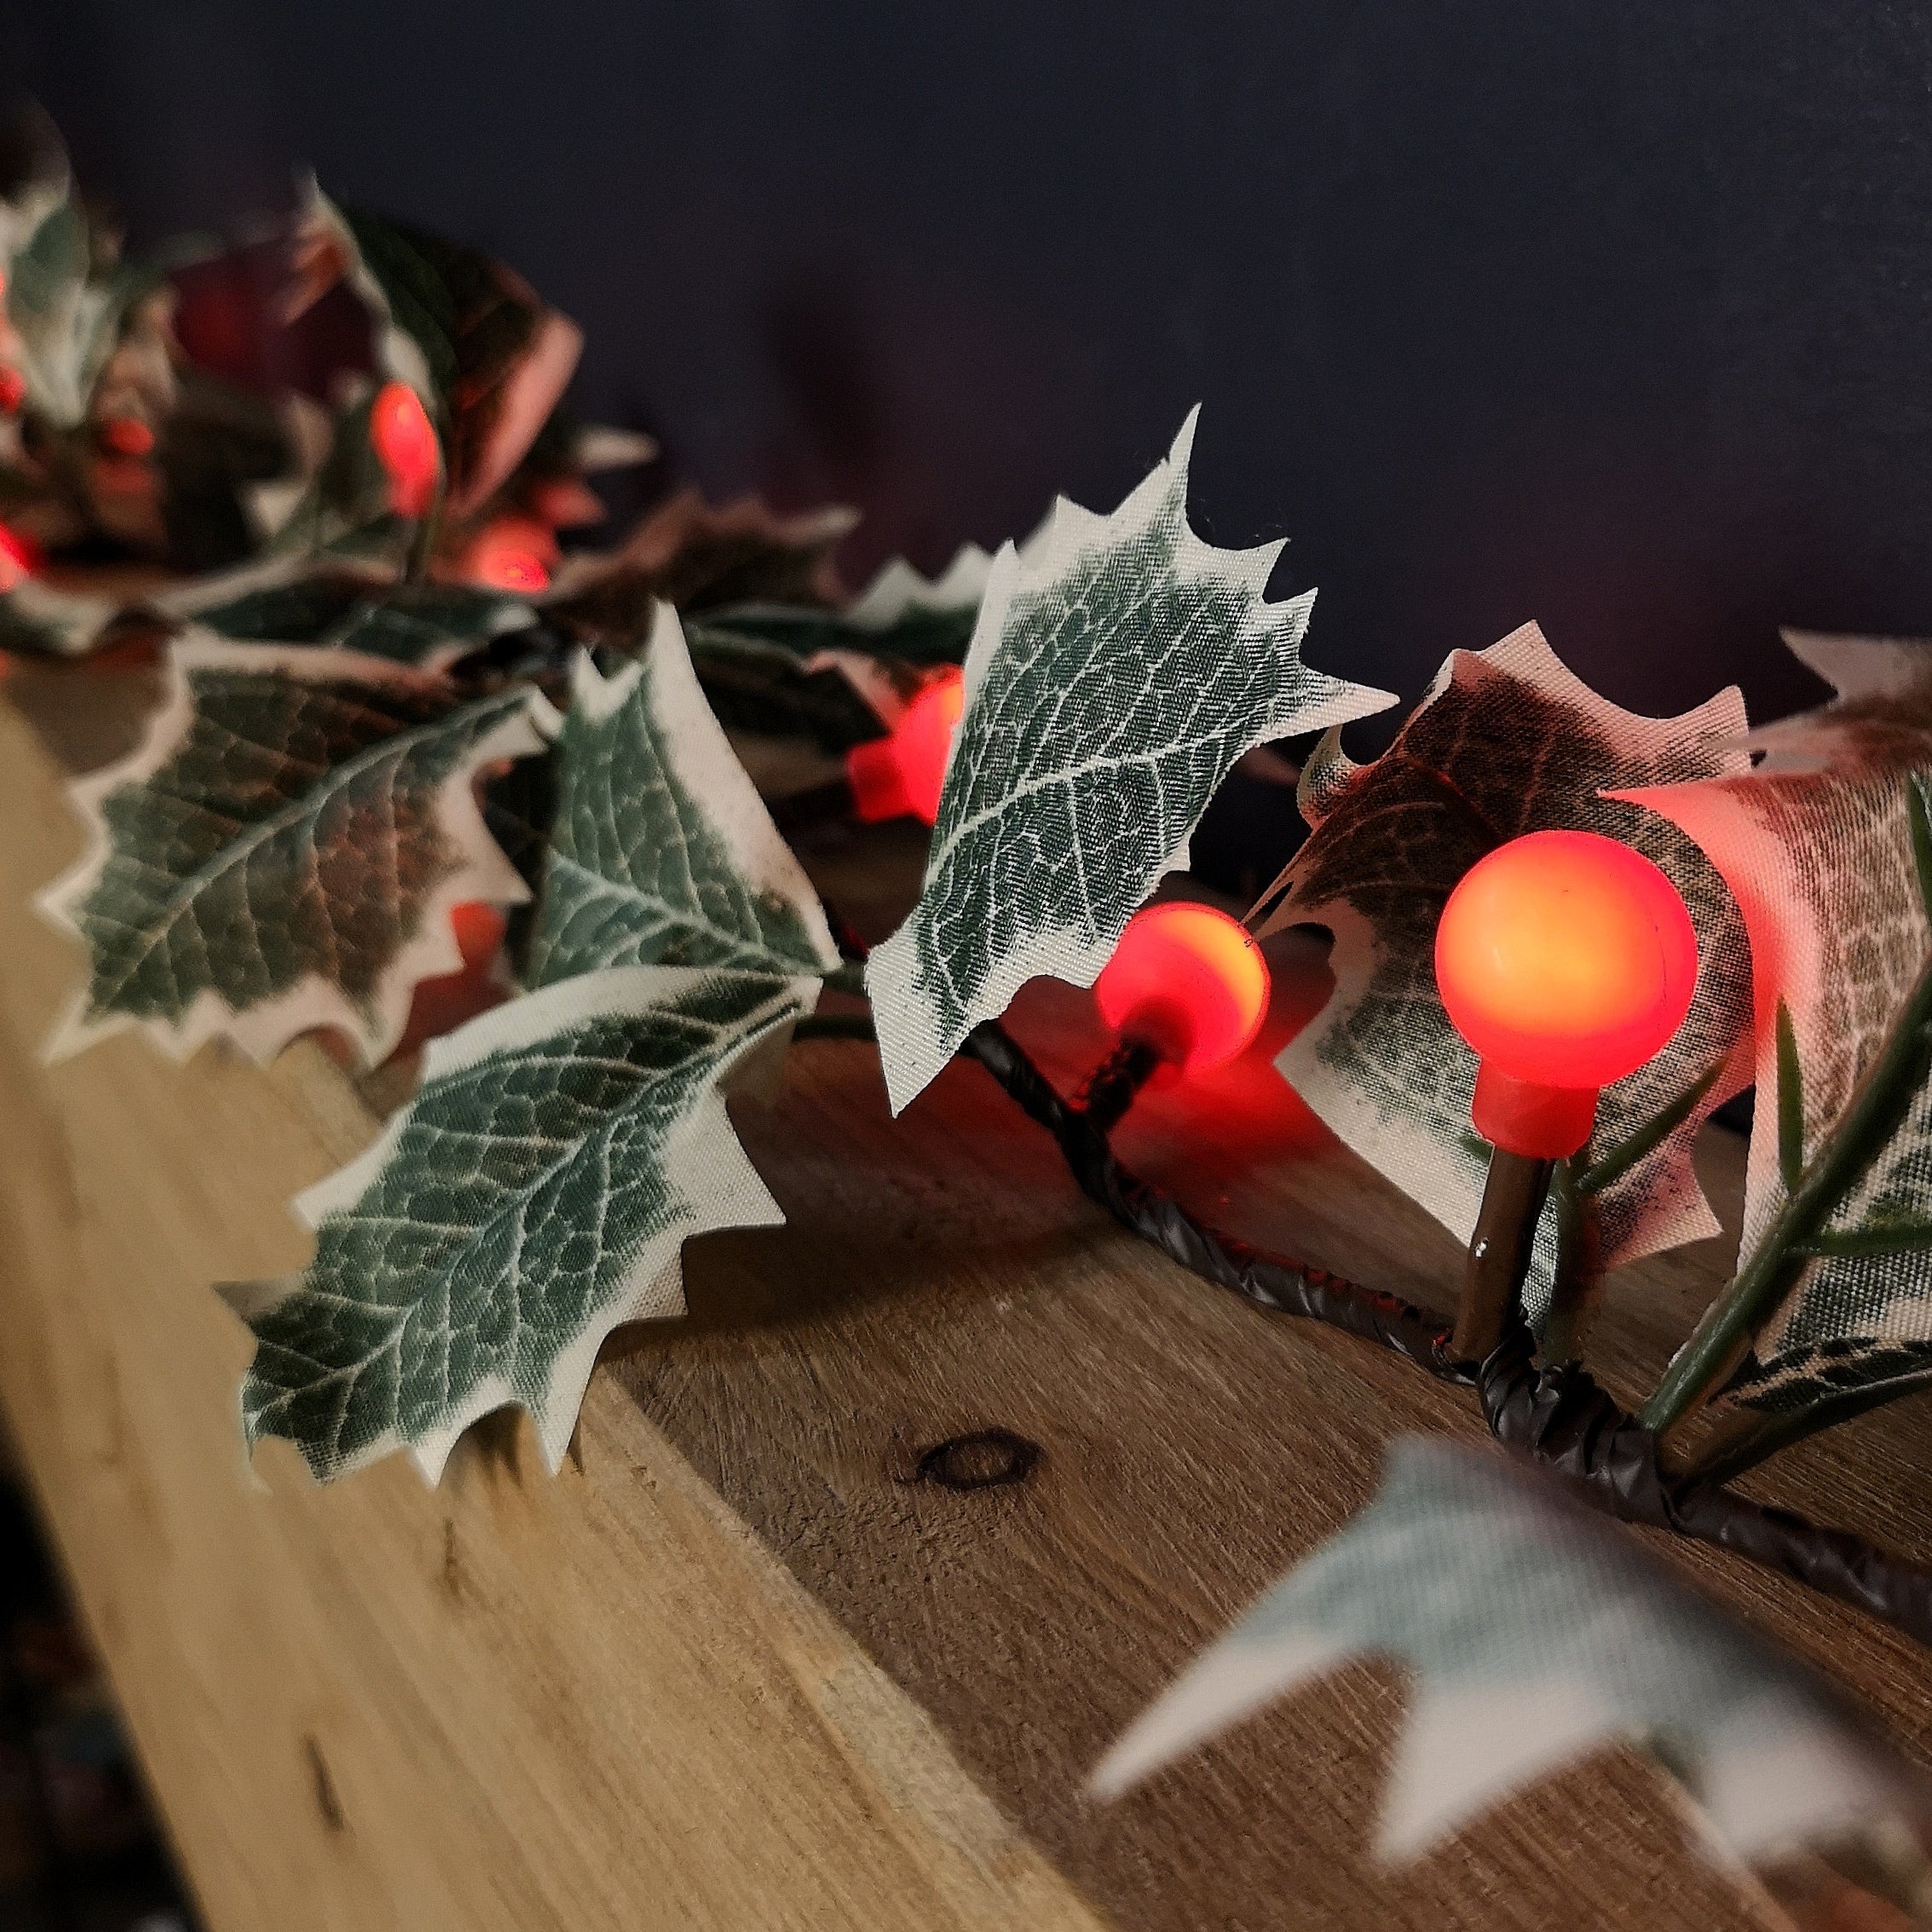 1.8m Artificial Garland with Berries & Lights Battery Operated with 35 Warm White LEDs